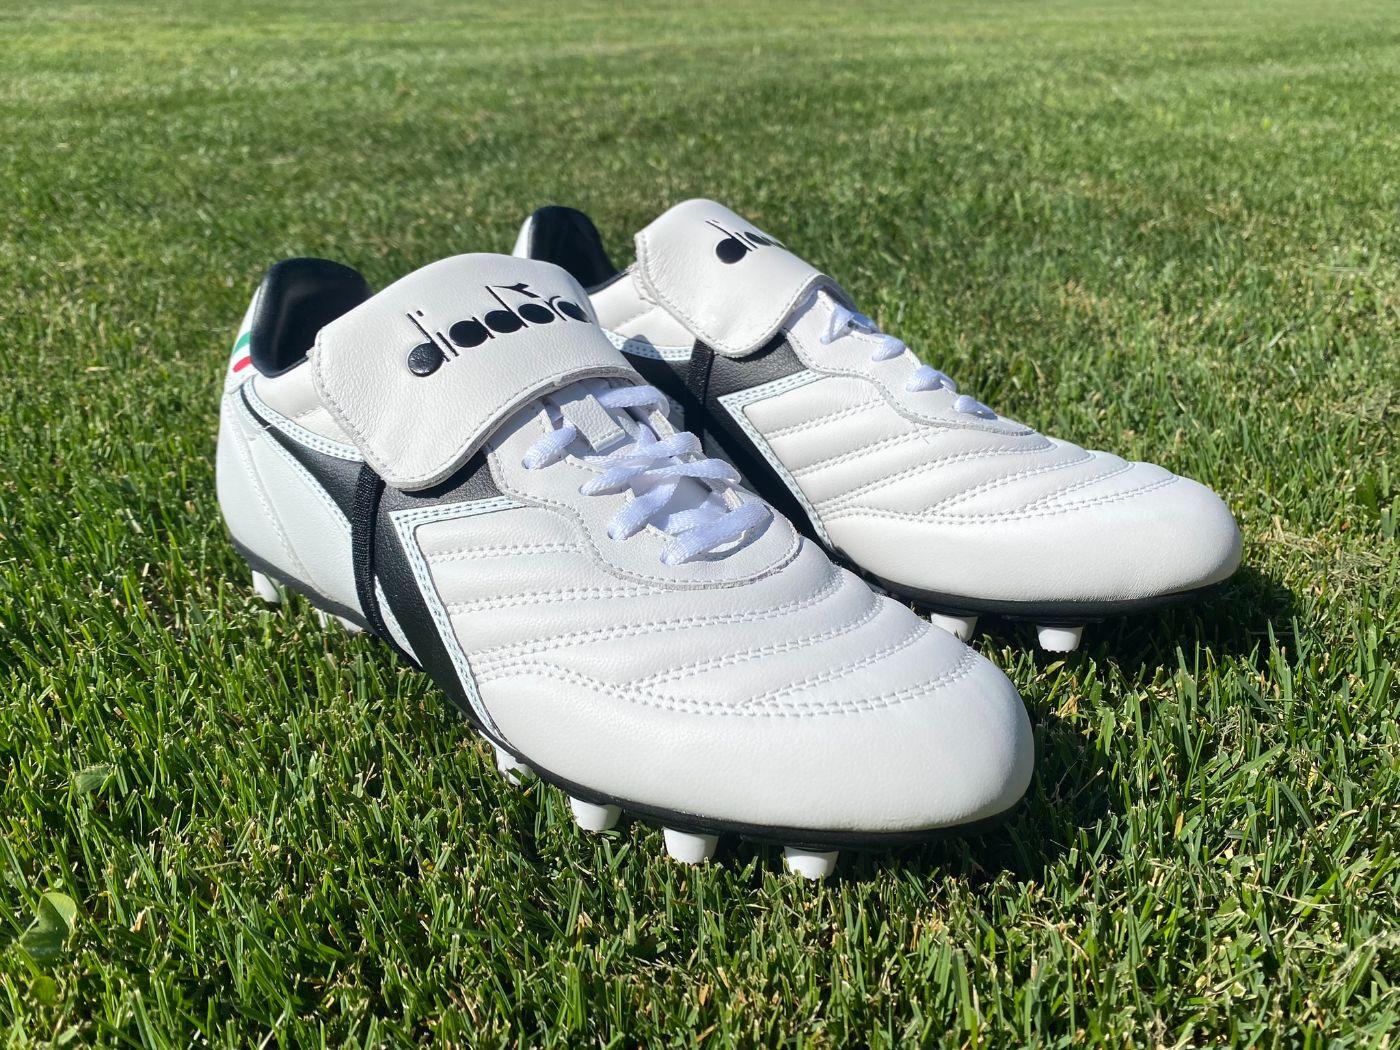 Review: These customized soccer shoes offer an ideal fit